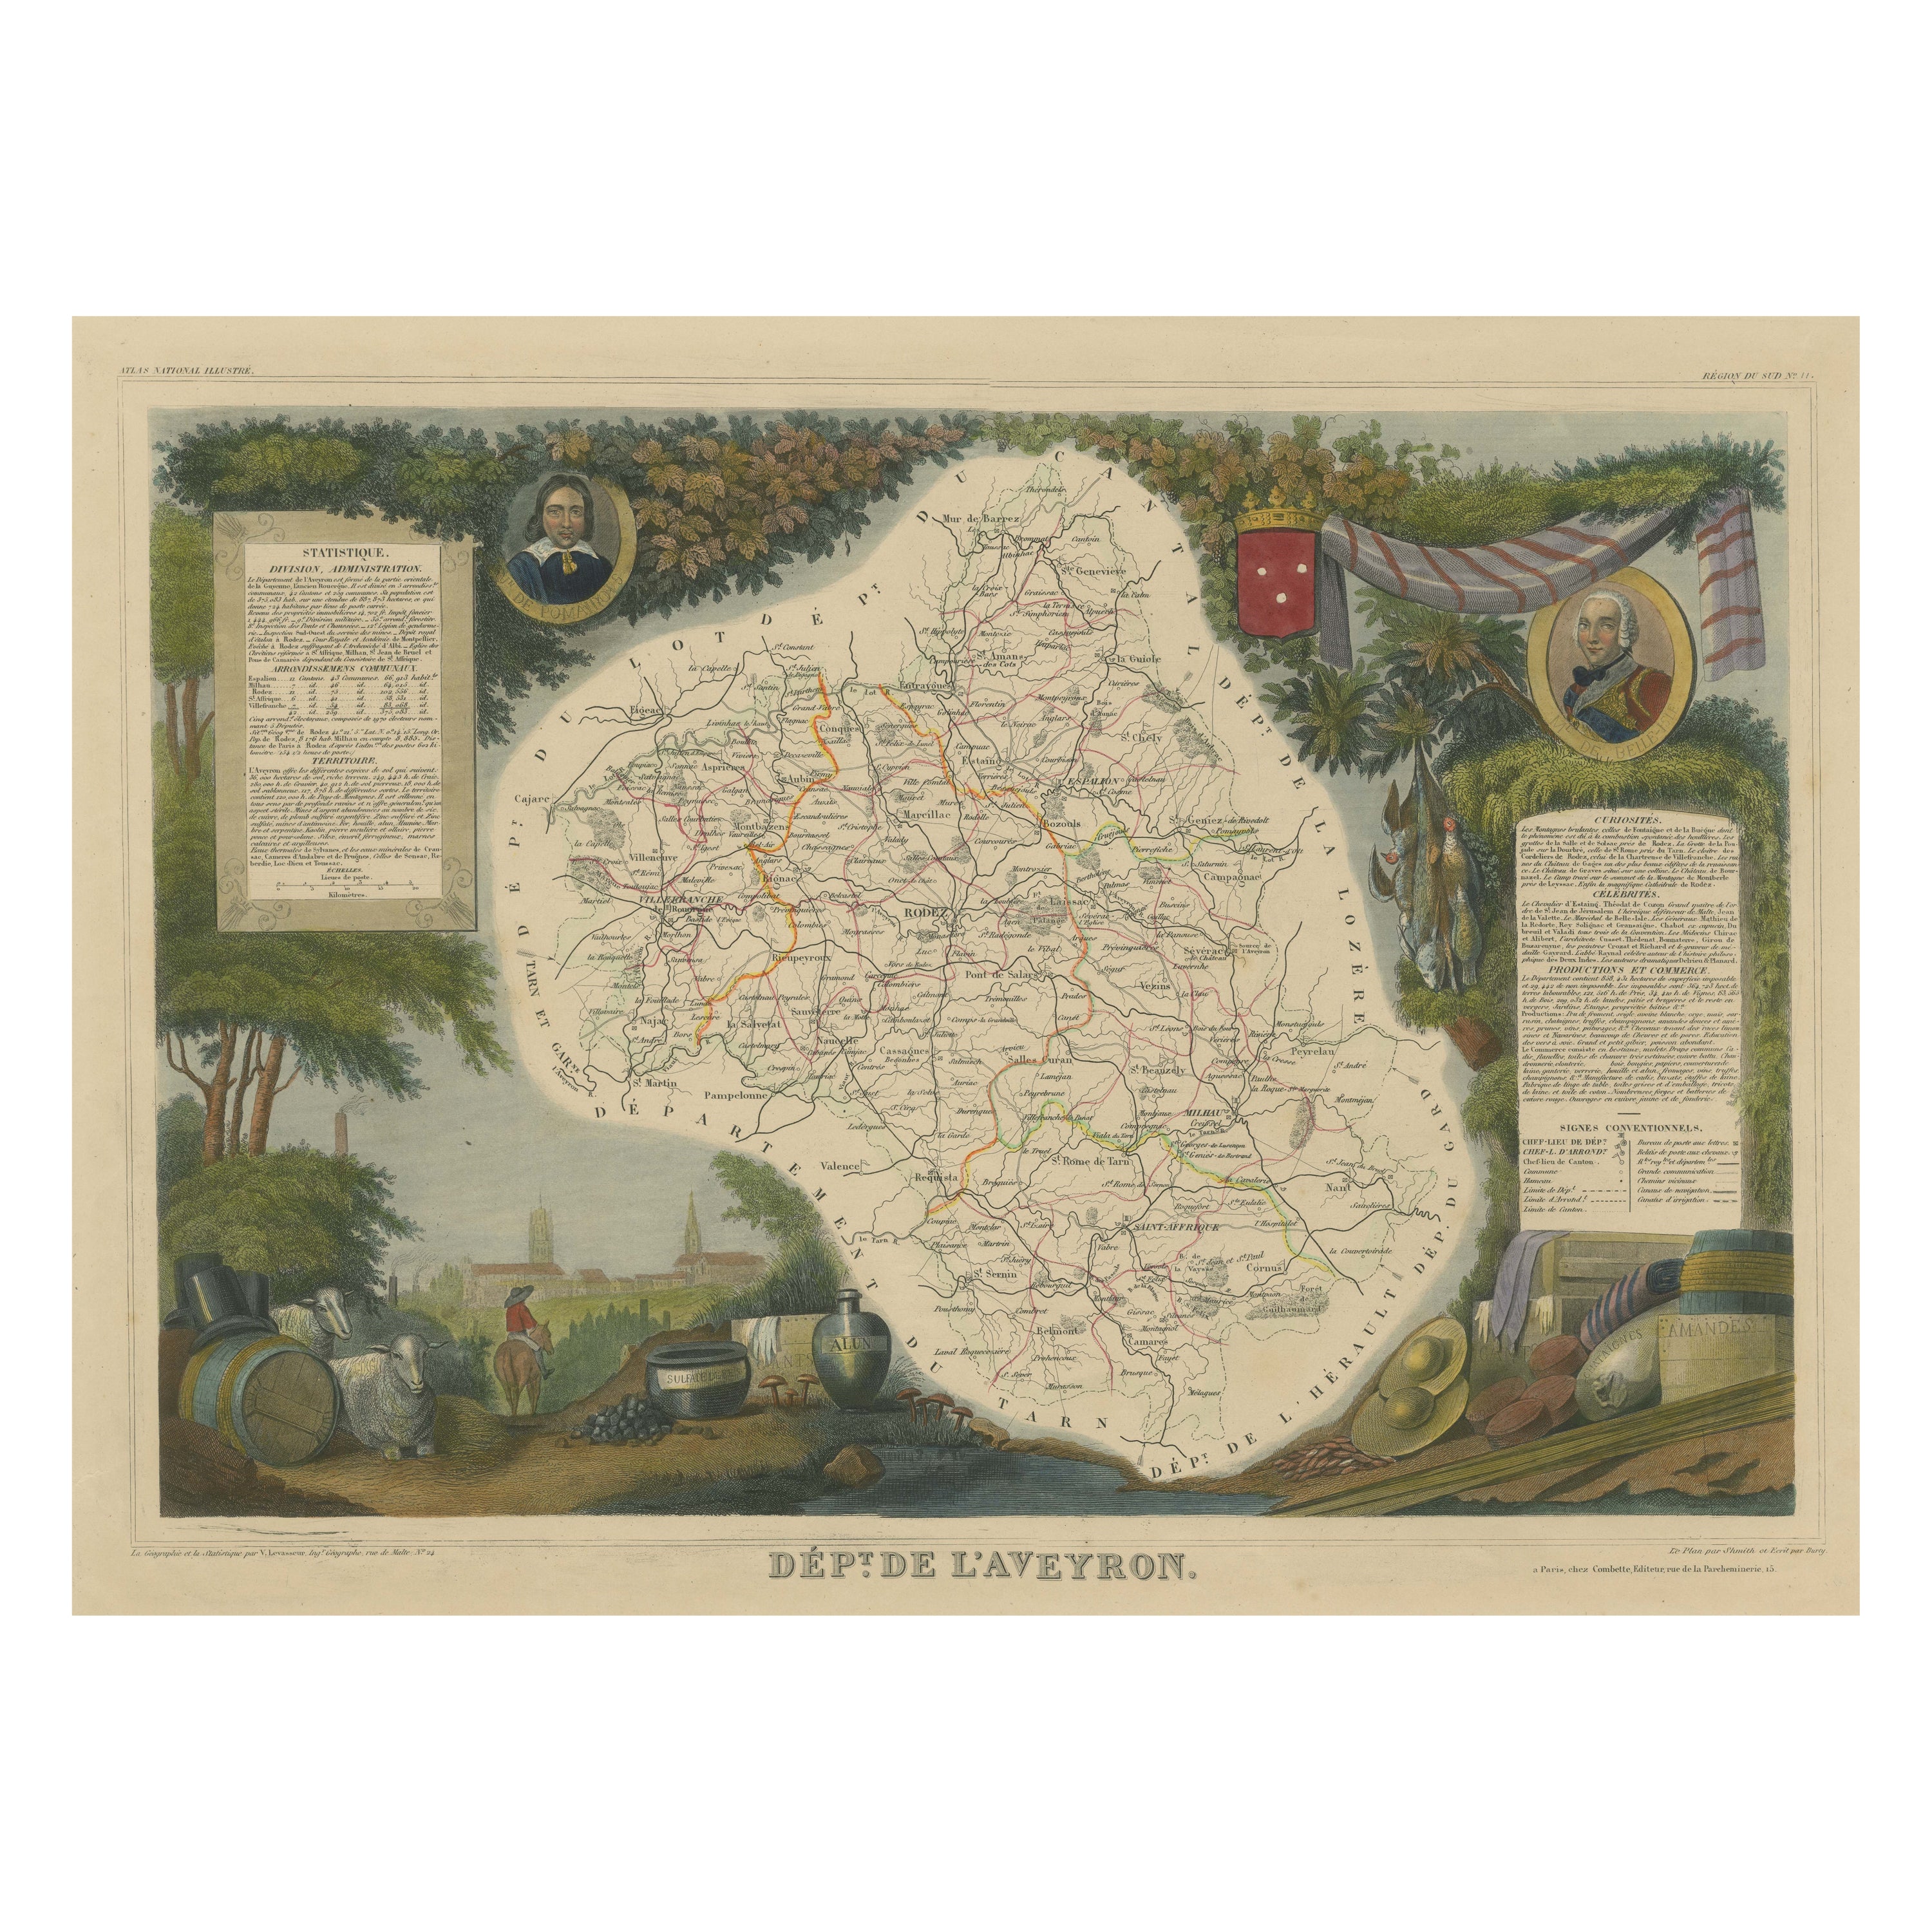 Hand Colored Antique Map of the department of Aveyron, France